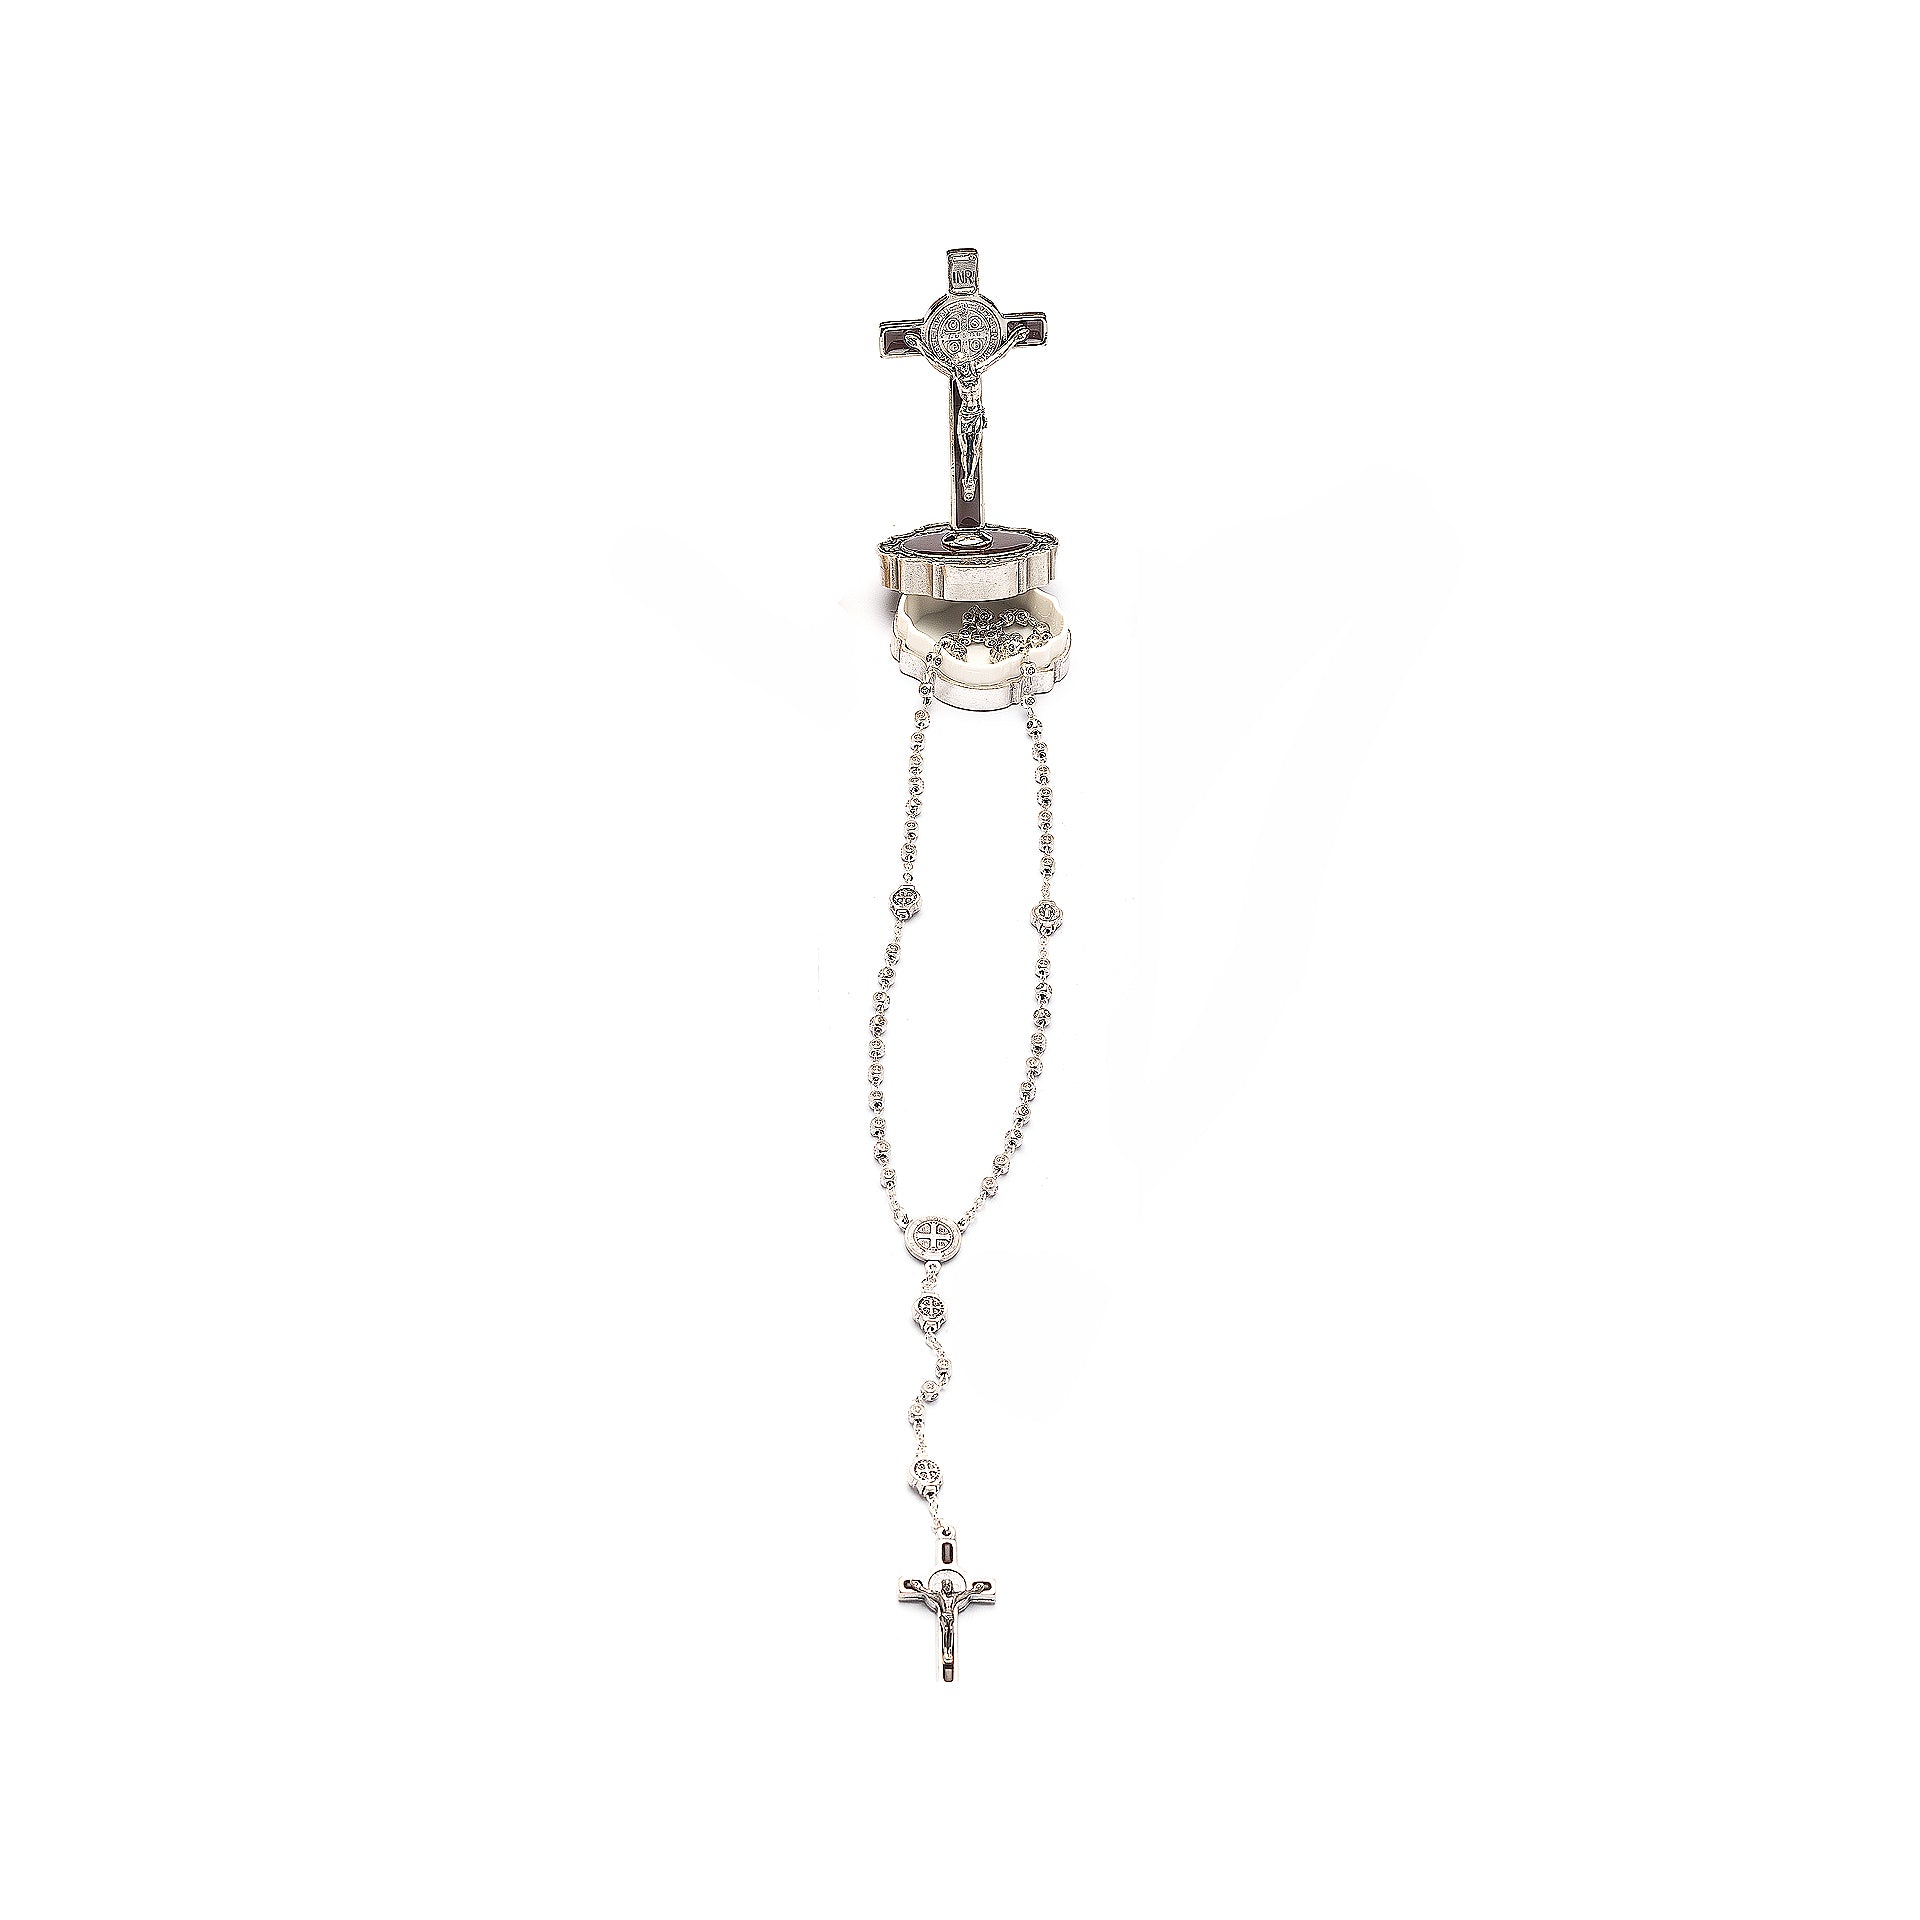 FINE JEWELRY Steeltime Mens Stainless Steel Rosary Necklaces | Pueblo Mall